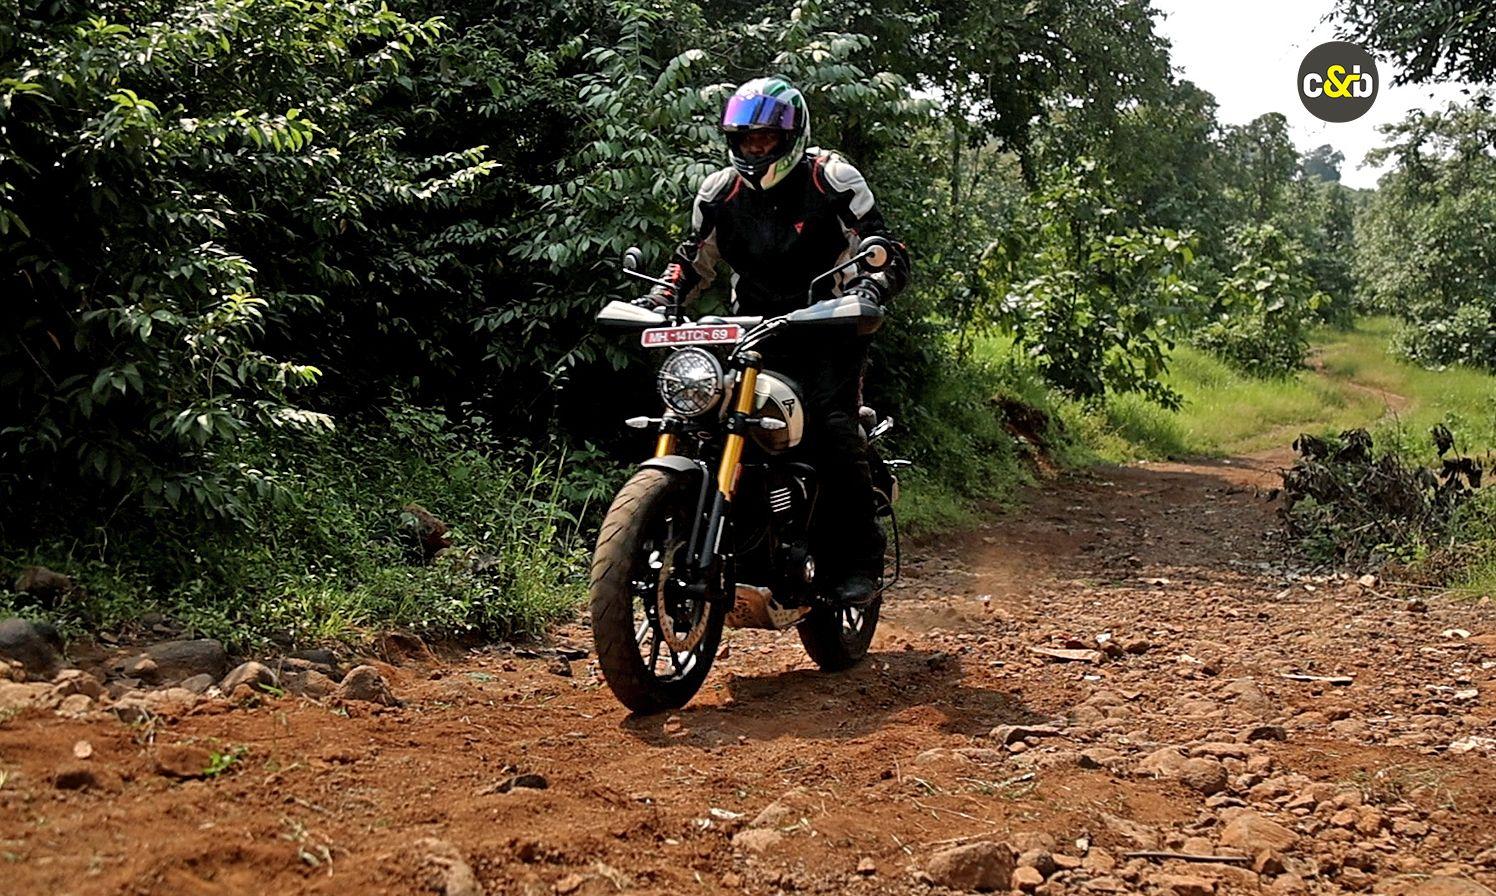 Attractive pricing, strikingly good looks and solidly capable! The Triumph Scrambler 400 X is a fun, fabulous and somewhat flawed machine which is difficult to ignore in the budget ADV segment. And yes, we know it’s a scrambler, not an ADV. 